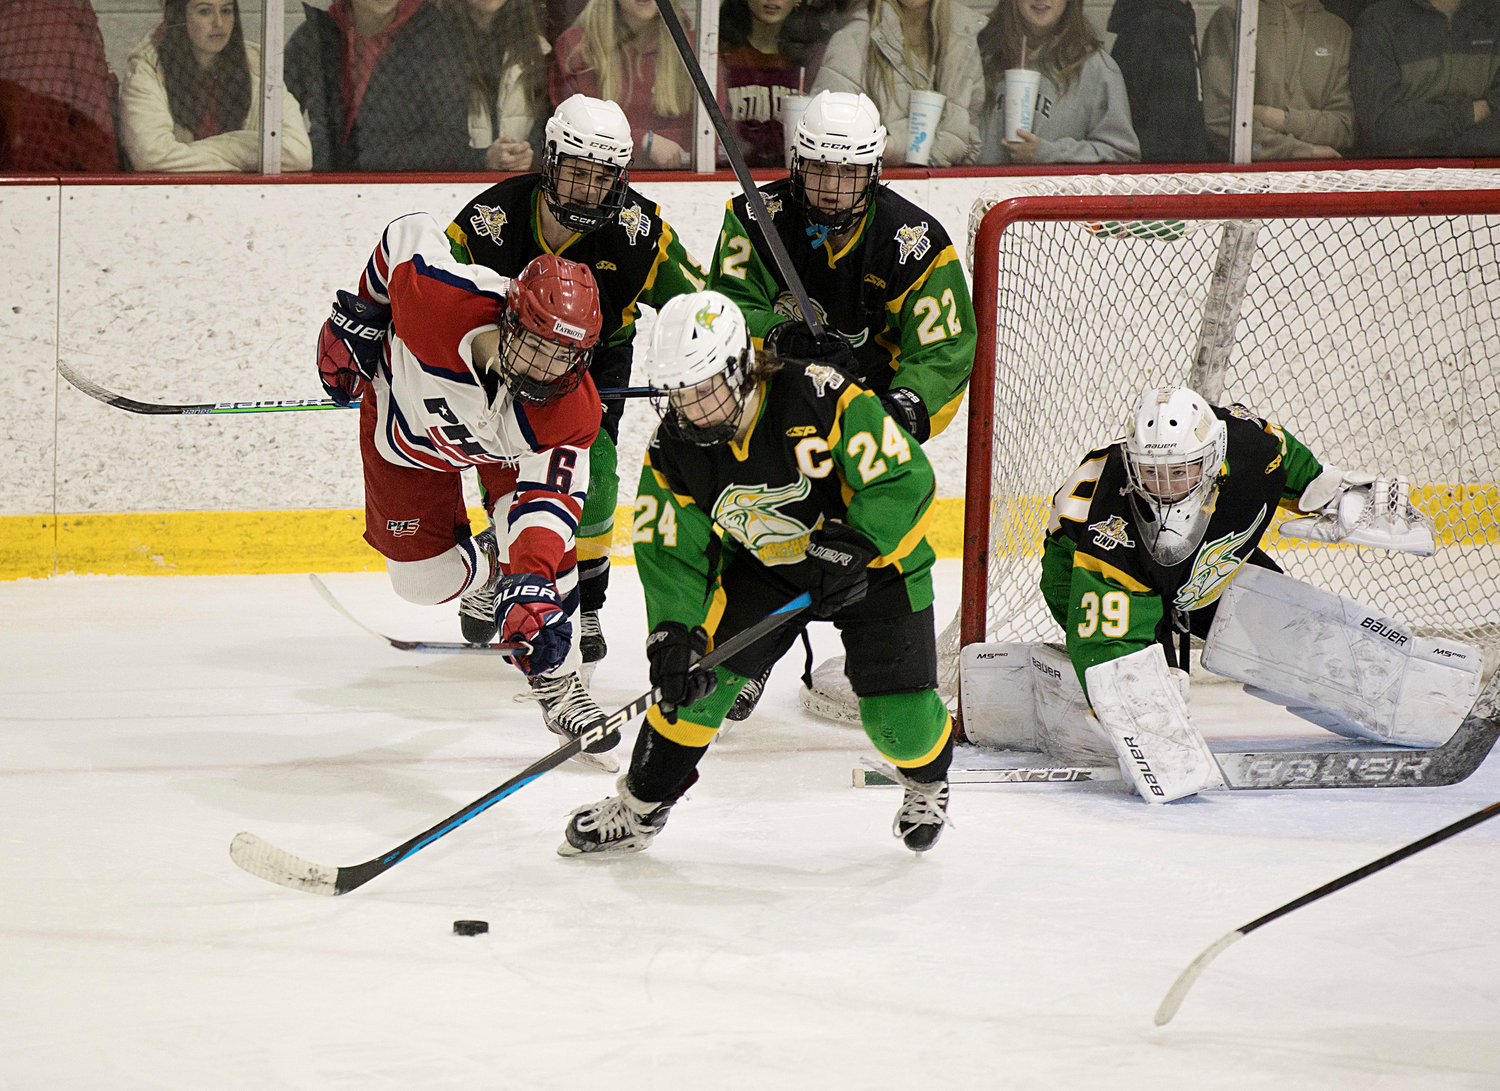 Henri Boneu reaches for the puck while surrounded by a trio of North Smithfield skaters.